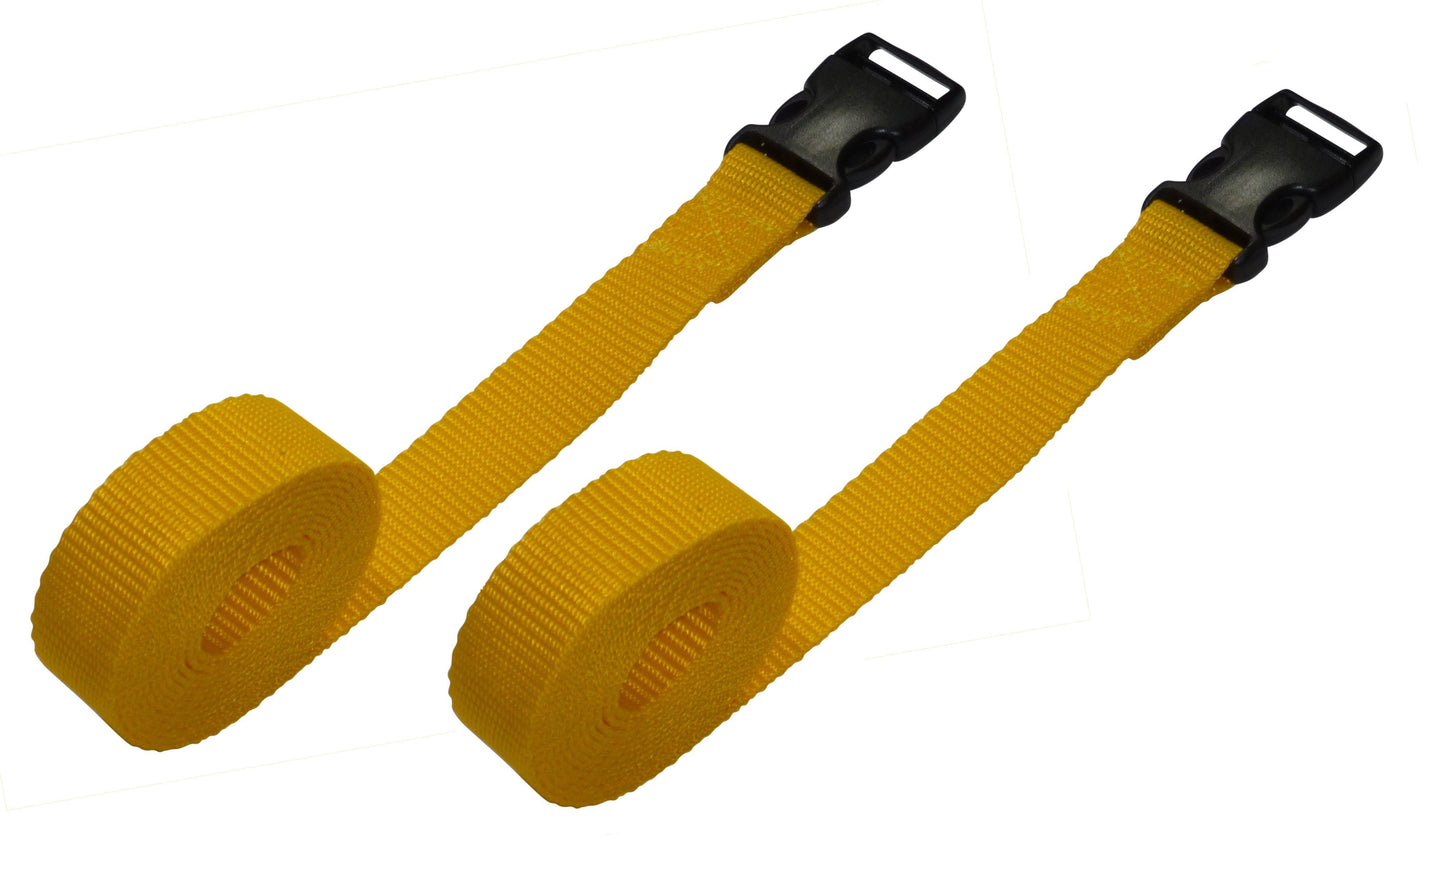 Benristraps 2 Pack Webbing Straps with Clips - Adjustable Luggage Straps in yellow